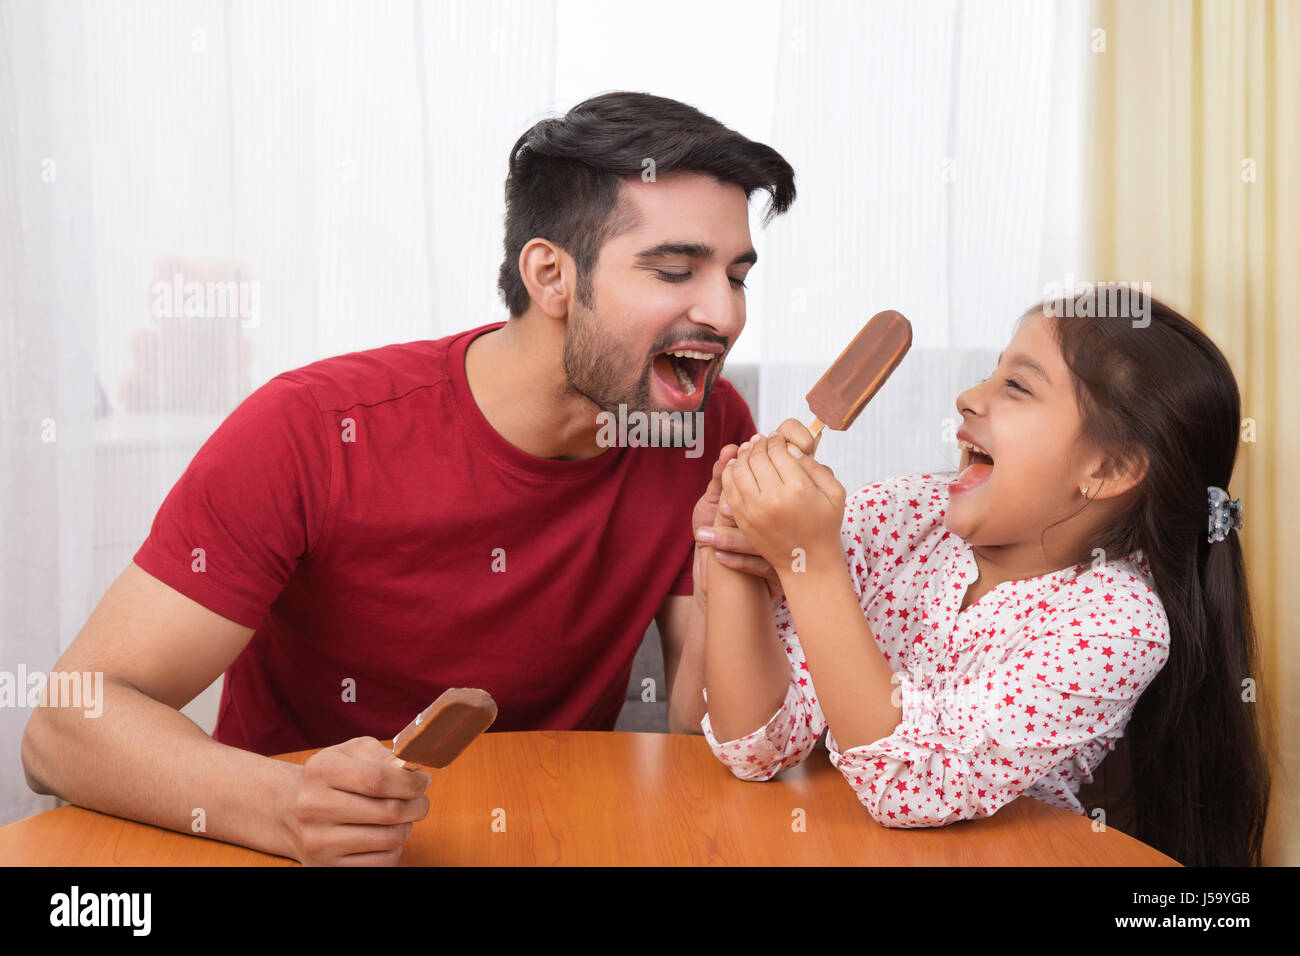 Father sharing ice cream with daughter Stock Photo